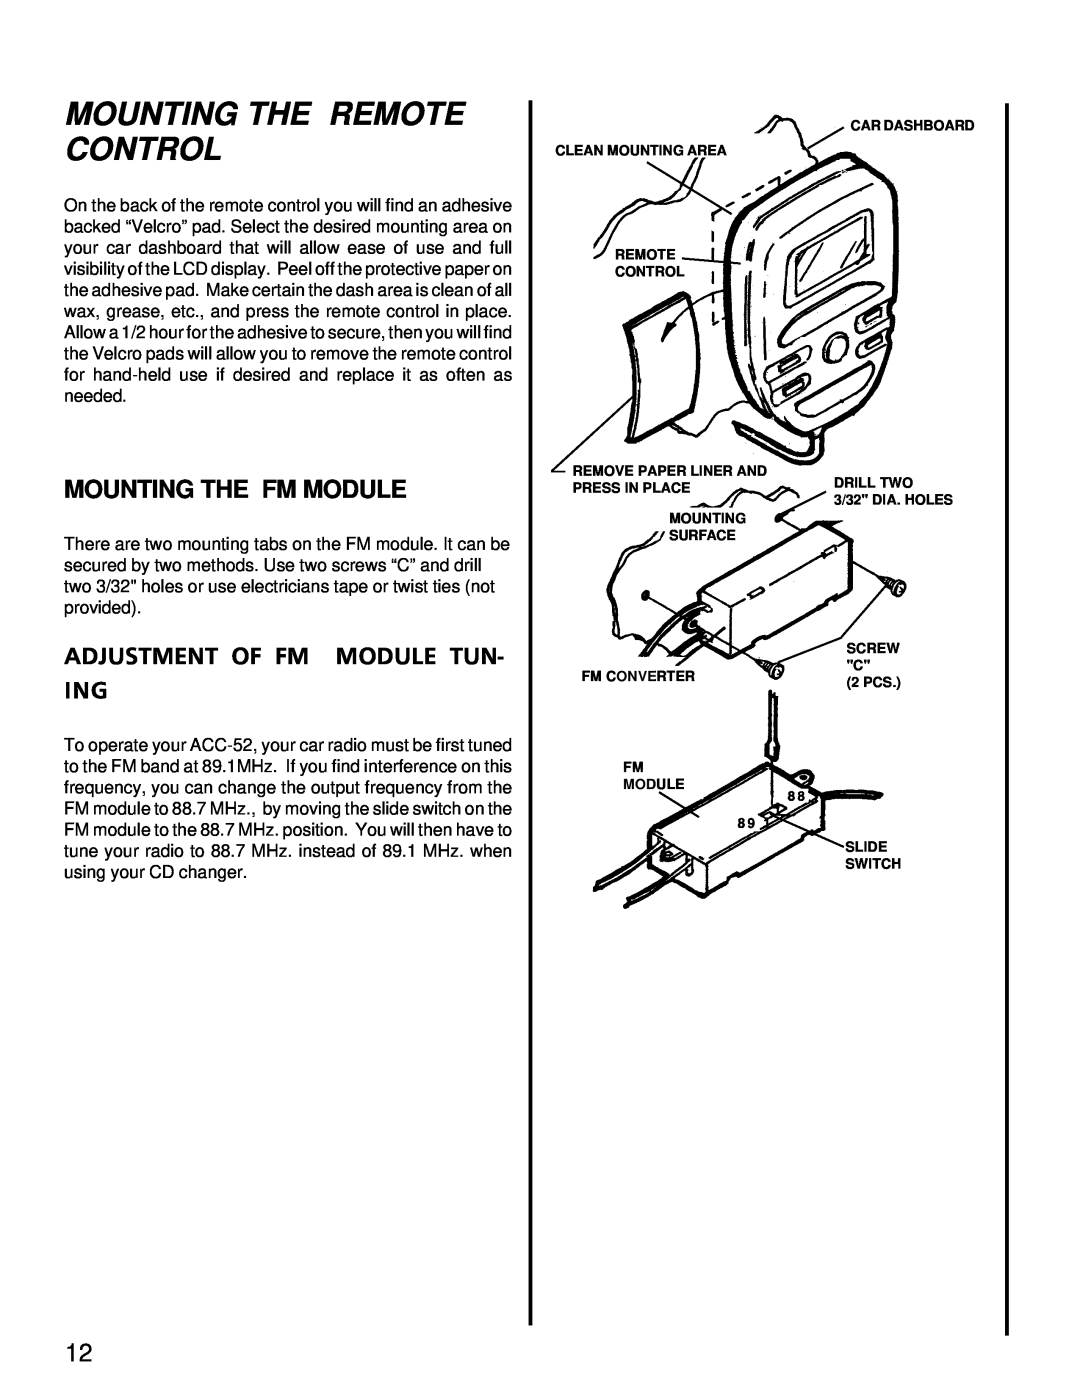 Audiovox ACC-52 owner manual Mounting The Remote Control, Mounting The Fm Module, Adjustment Of Fm Module Tun- Ing 